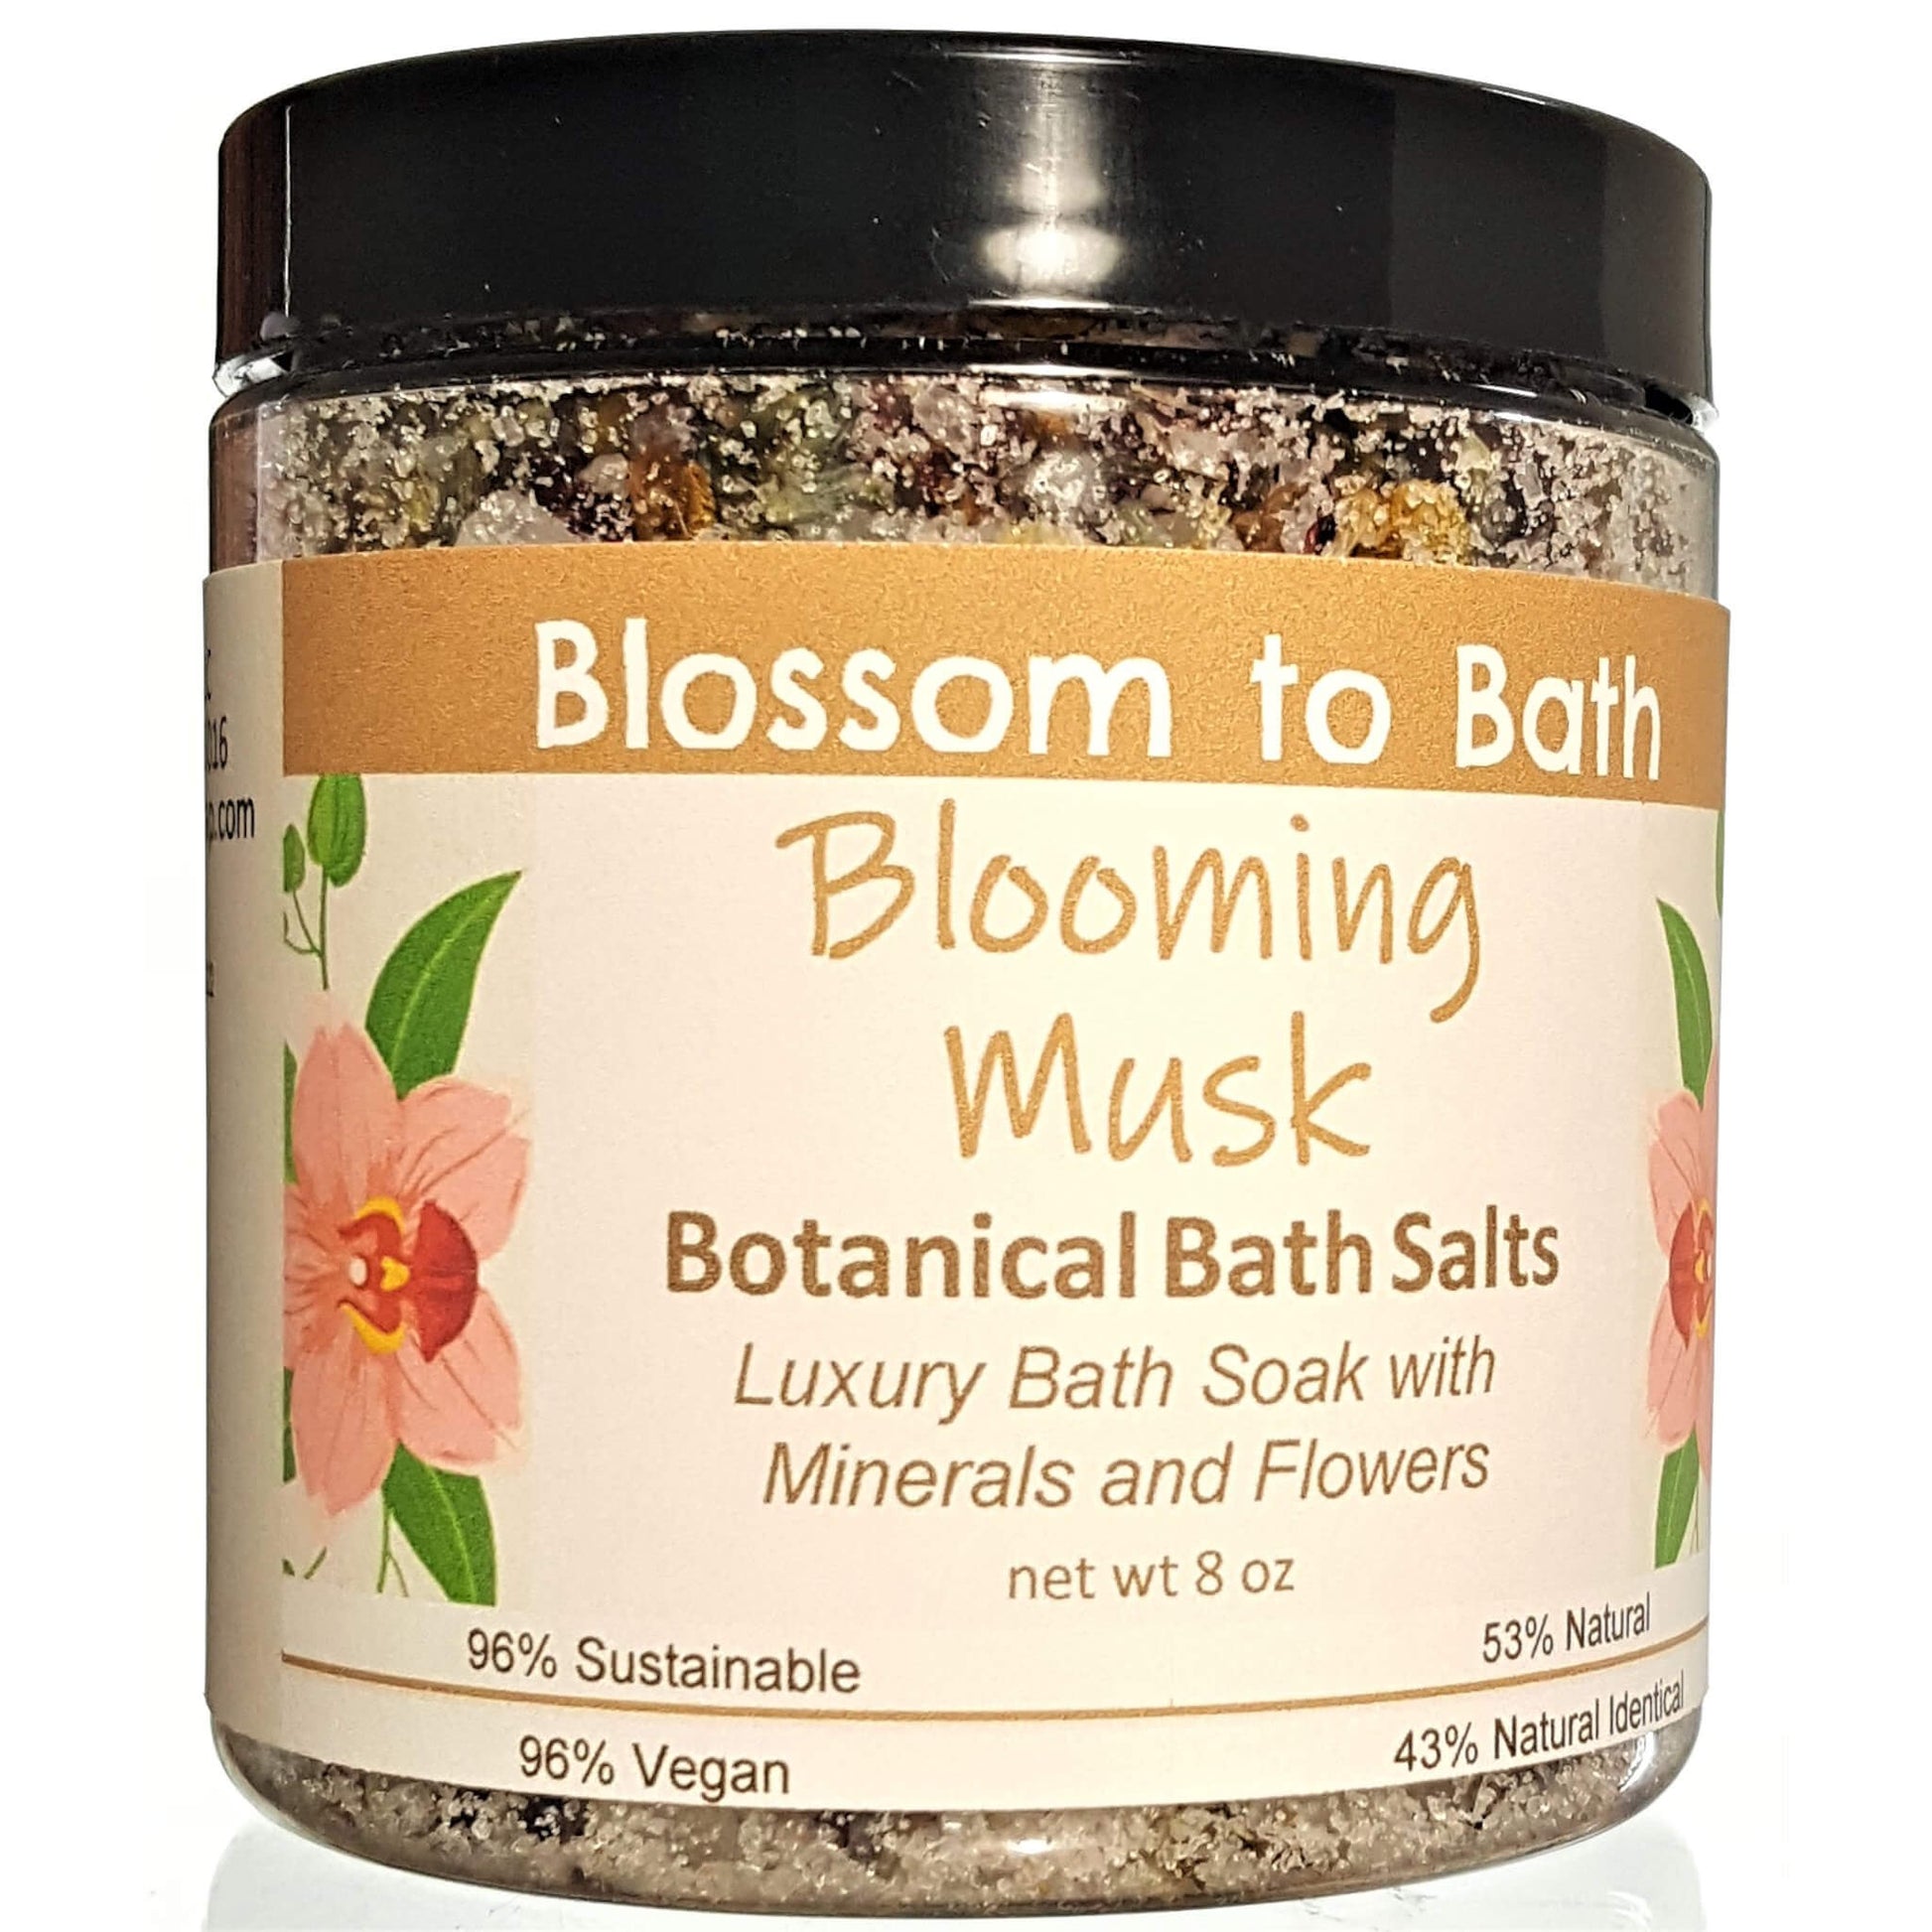 Buy Blossom to Bath Blooming Musk Botanical Bath Salts from Flowersong Soap Studio.  A hand selected variety of skin loving botanicals and mineral rich salts for a unique, luxurious soaking experience  A sensual floral and musk scent that is subtle and feminine.